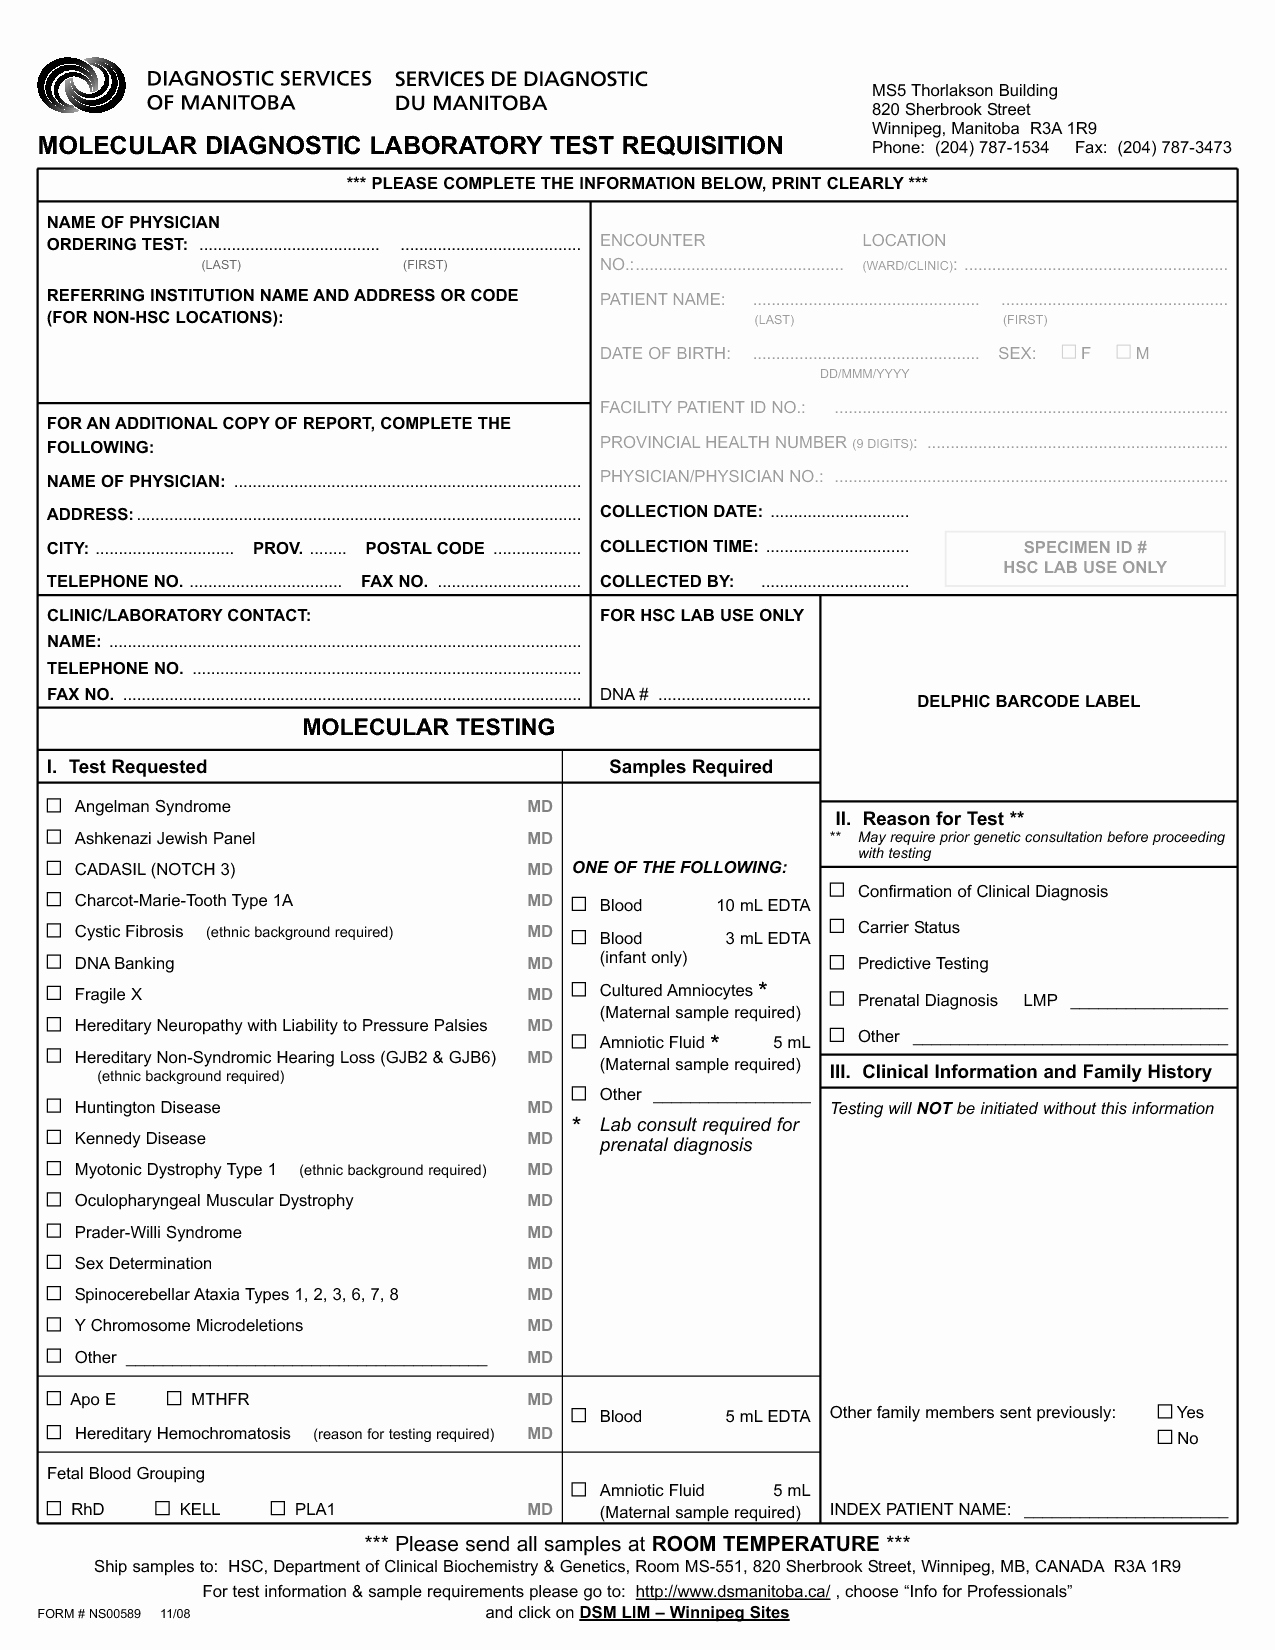 Best S Of Printable Requisition forms Requisition